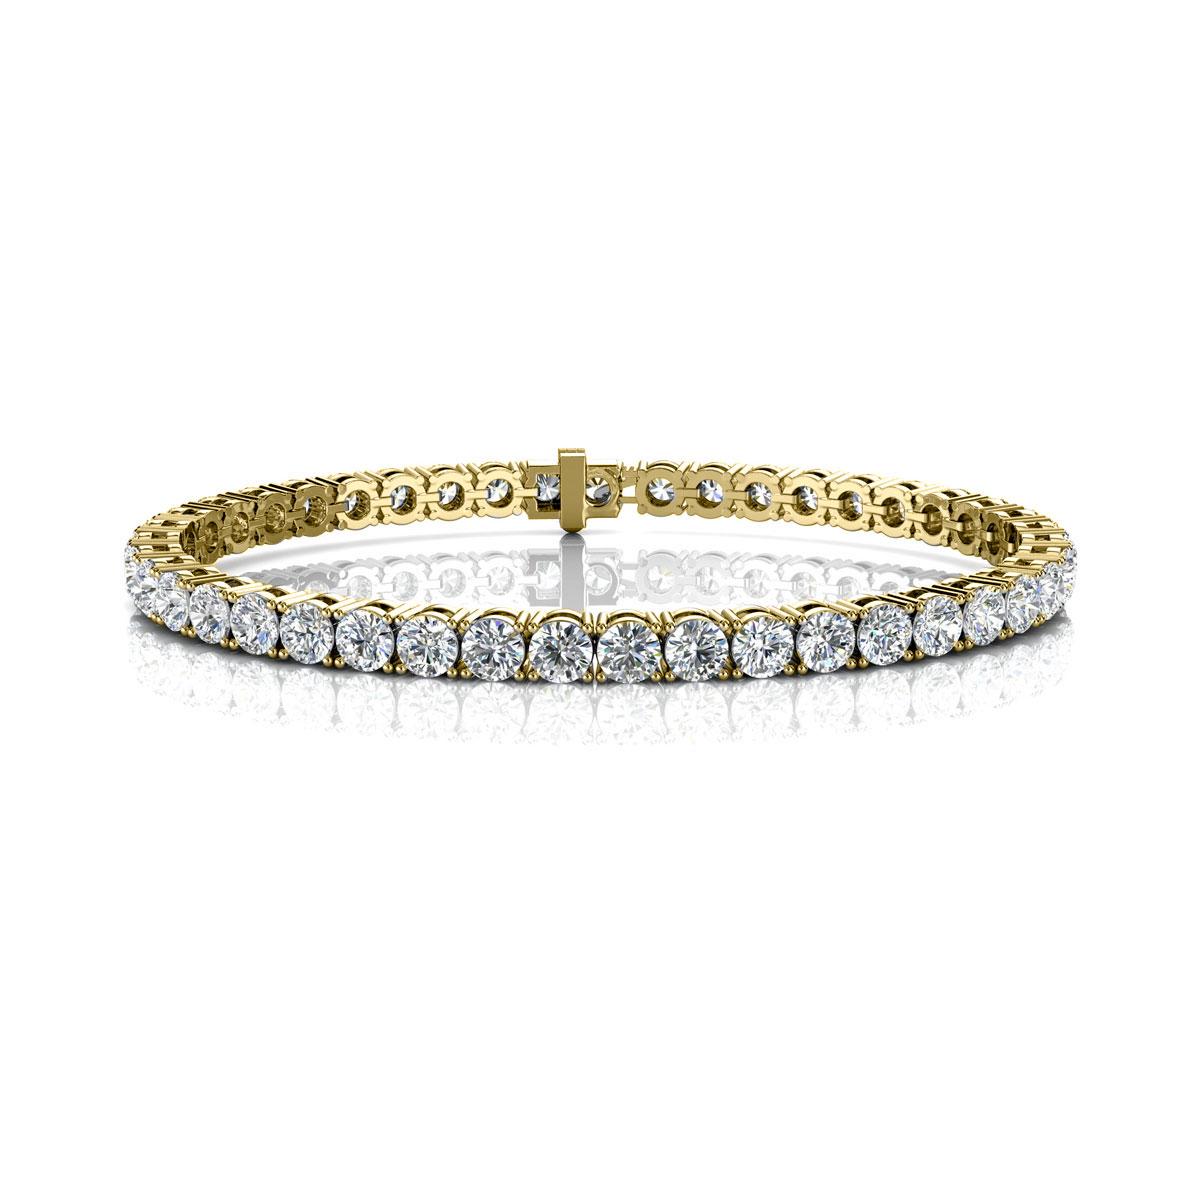 A timeless four prongs diamonds tennis bracelet. Experience the Difference!

Product details: 

Center Gemstone Type: NATURAL DIAMOND
Center Gemstone Color: WHITE
Center Gemstone Shape: ROUND
Center Diamond Carat Weight: 8
Metal: 14K Yellow